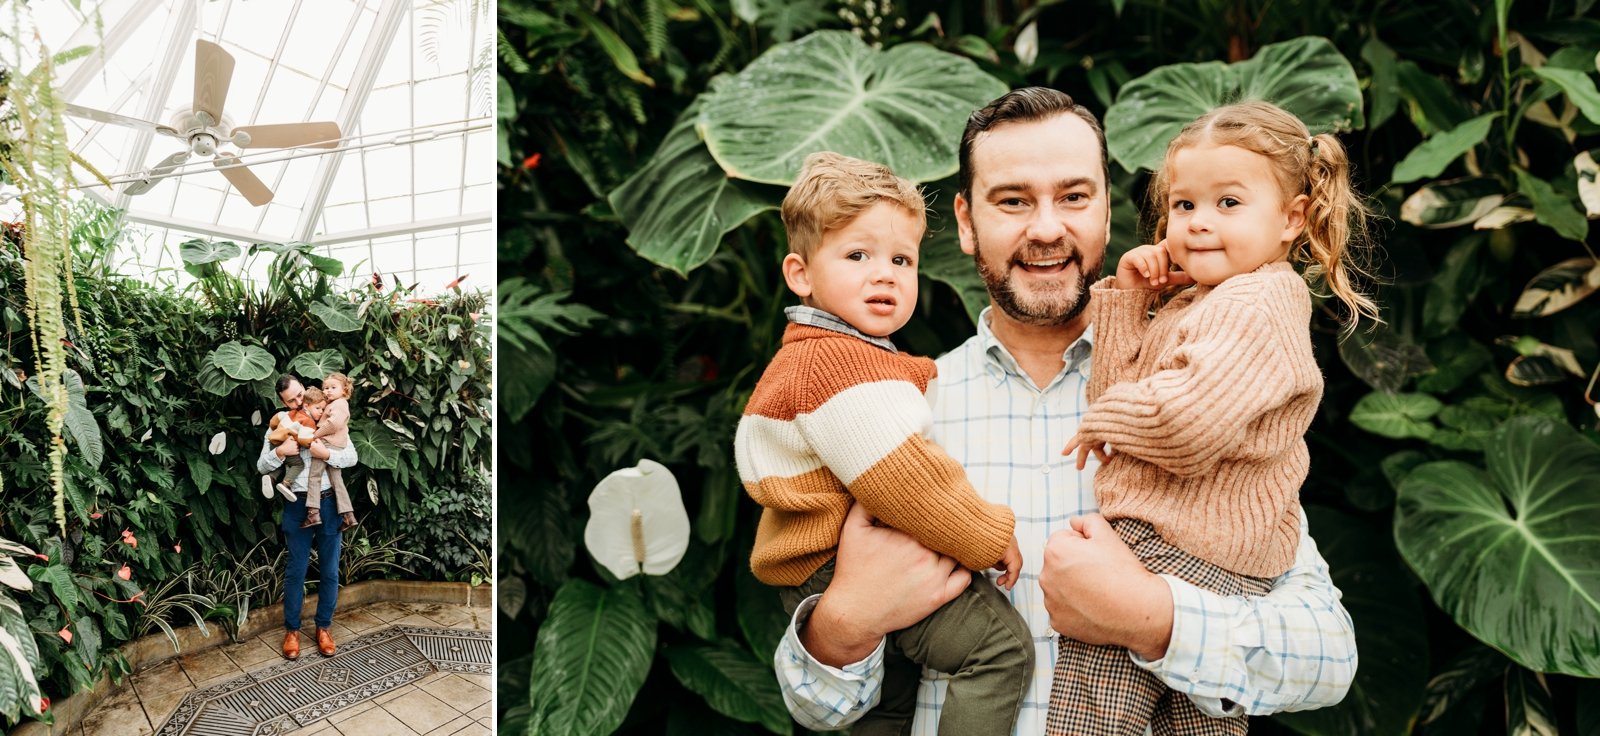 Family Photoshoot at the San Francisco Conservatory of Flowers Bay Area Family Photographer Young Soul Photography 7.jpg